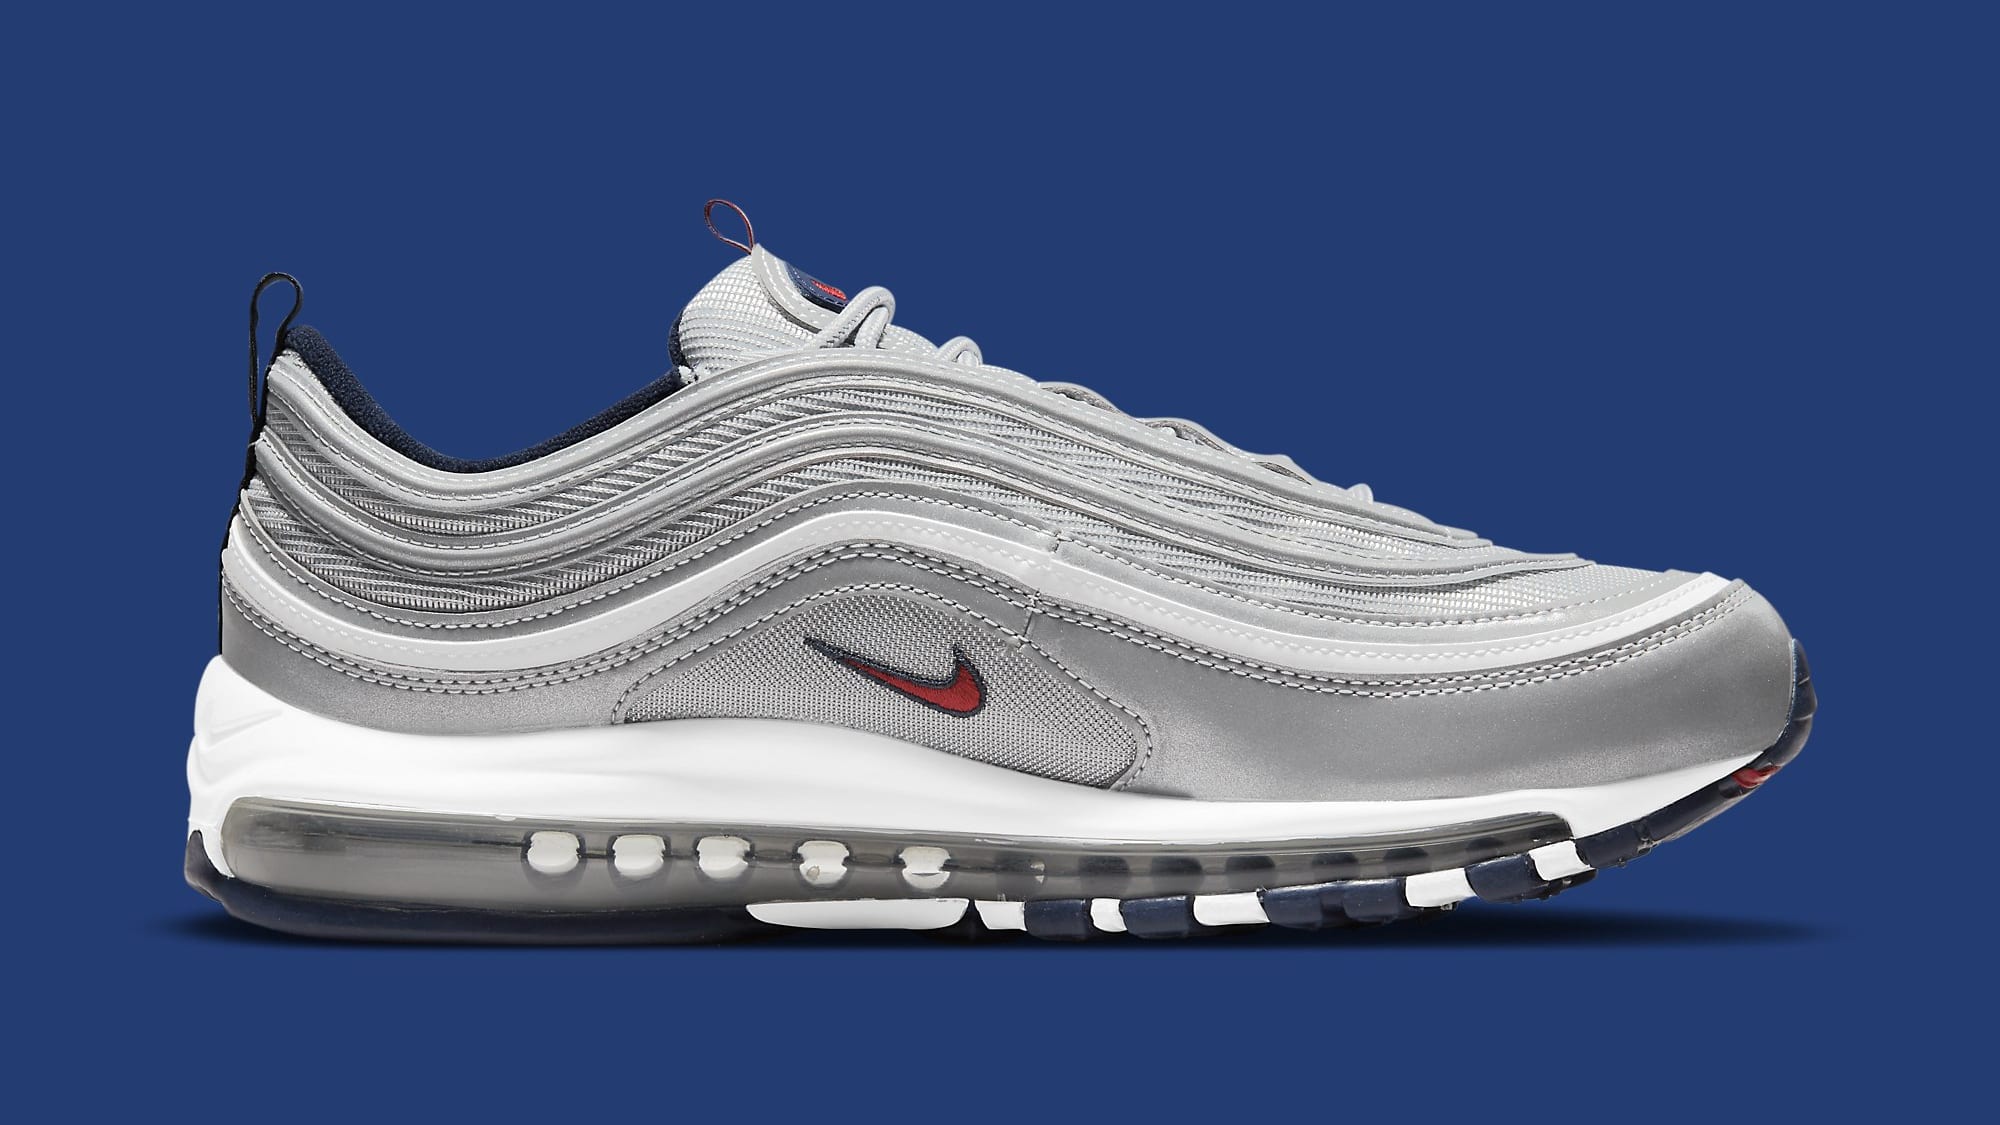 Nike Air Max 97 OG SP / PRD 'Puerto Rico' DH2319-001 Release Date ... كوفي كابتشينو